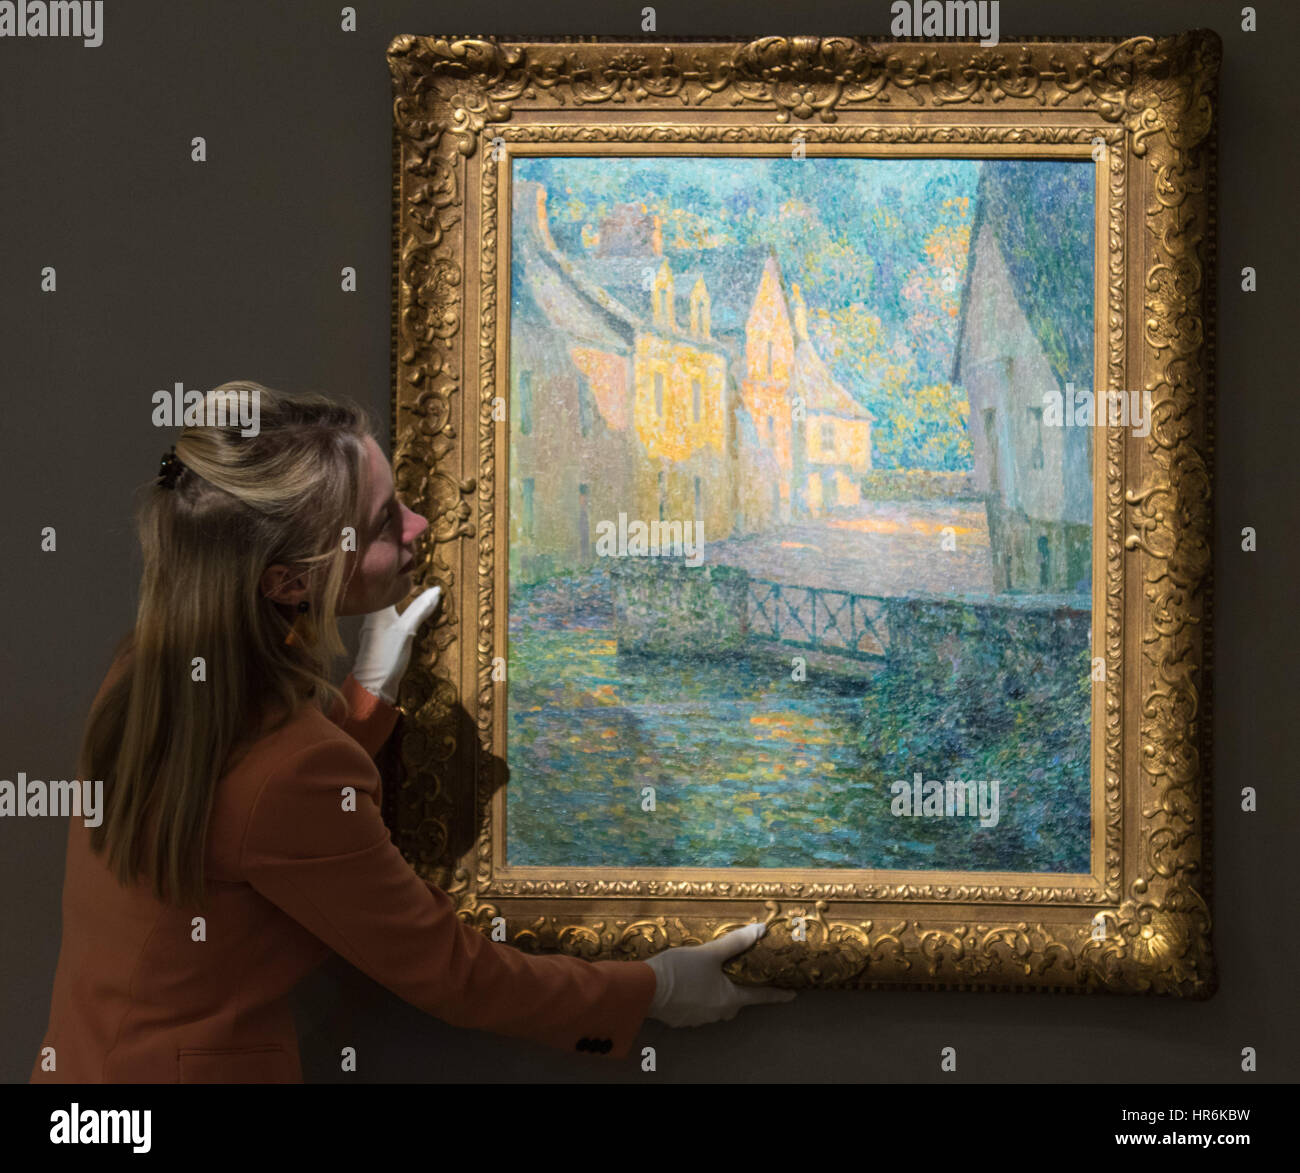 Bonhams, London, February 27th 2017. A member of Bonham's staff straightens Henri Le Sidaner's 'Matin doré', which is expected to fetch between £150,000 and £200,000, at the Bonhams impressionist and modern art sale press preview at their Mayfair gallery in London. Credit: Paul Davey/Alamy Live News Stock Photo